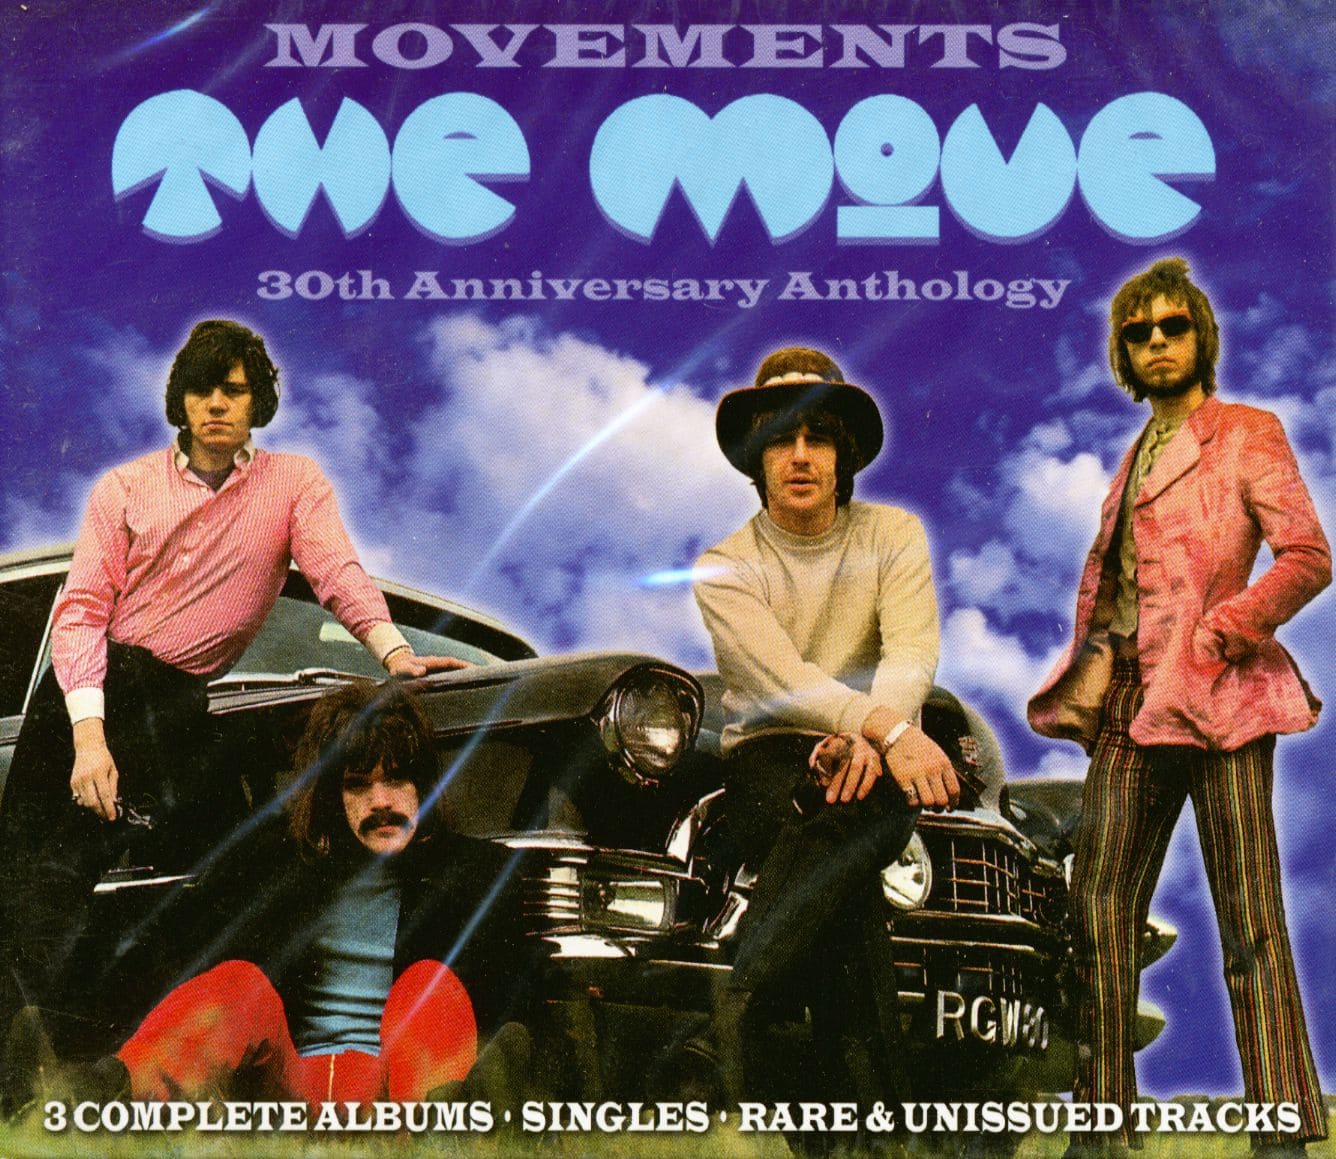 The Move CD: Movements - 30th Anniversary Anthology (3-CD) - Bear